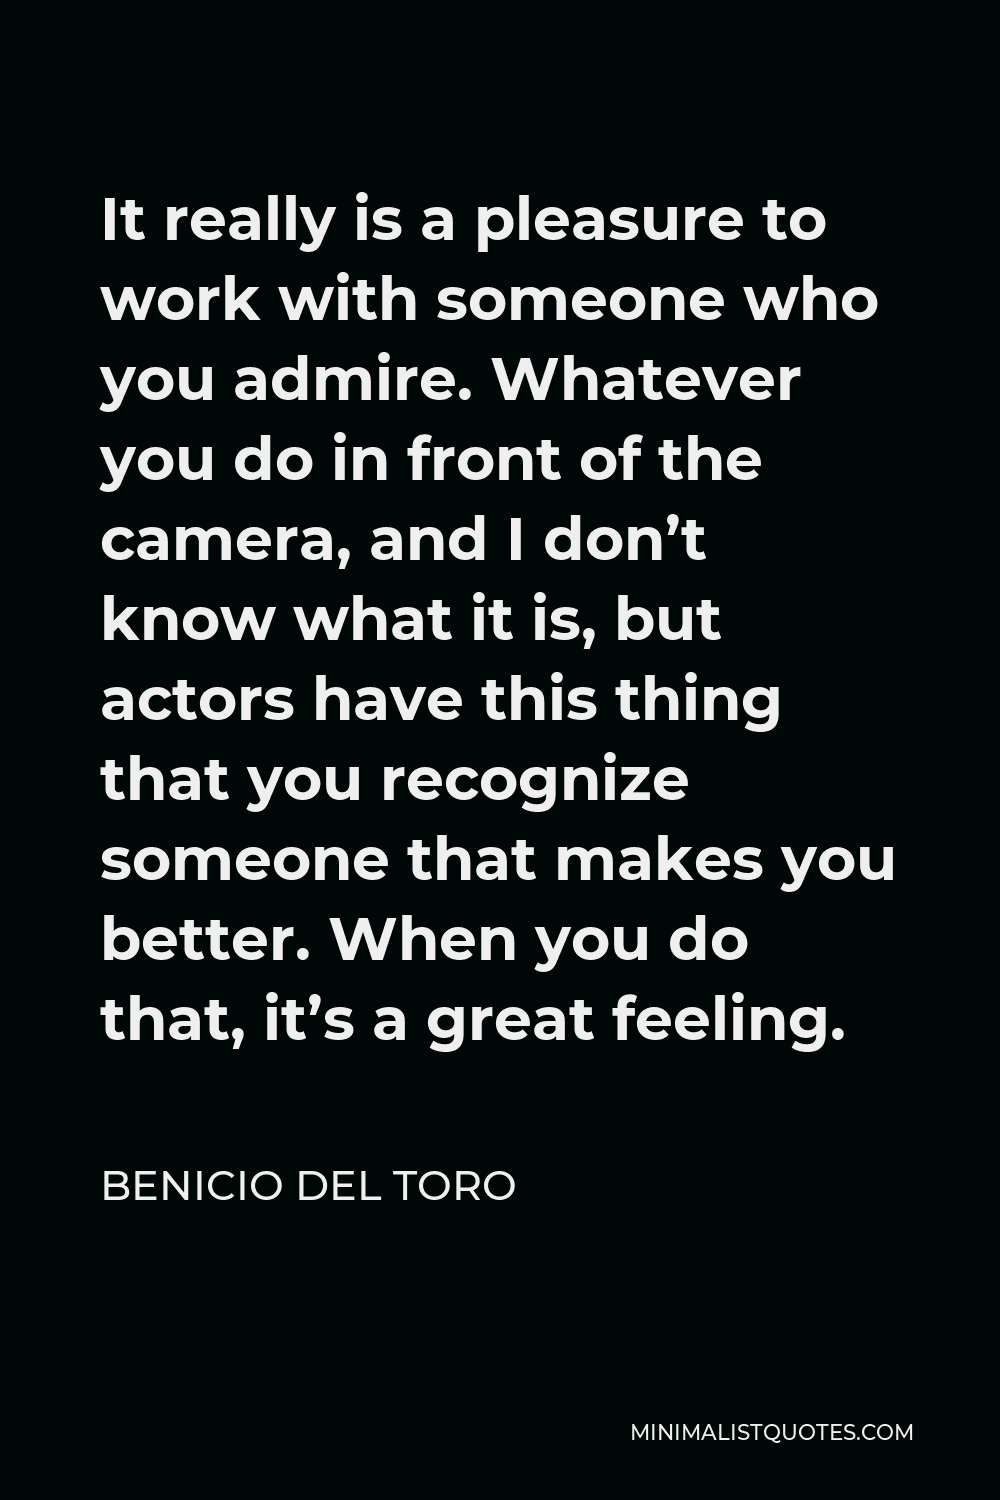 Benicio Del Toro Quote - It really is a pleasure to work with someone who you admire. Whatever you do in front of the camera, and I don’t know what it is, but actors have this thing that you recognize someone that makes you better. When you do that, it’s a great feeling.